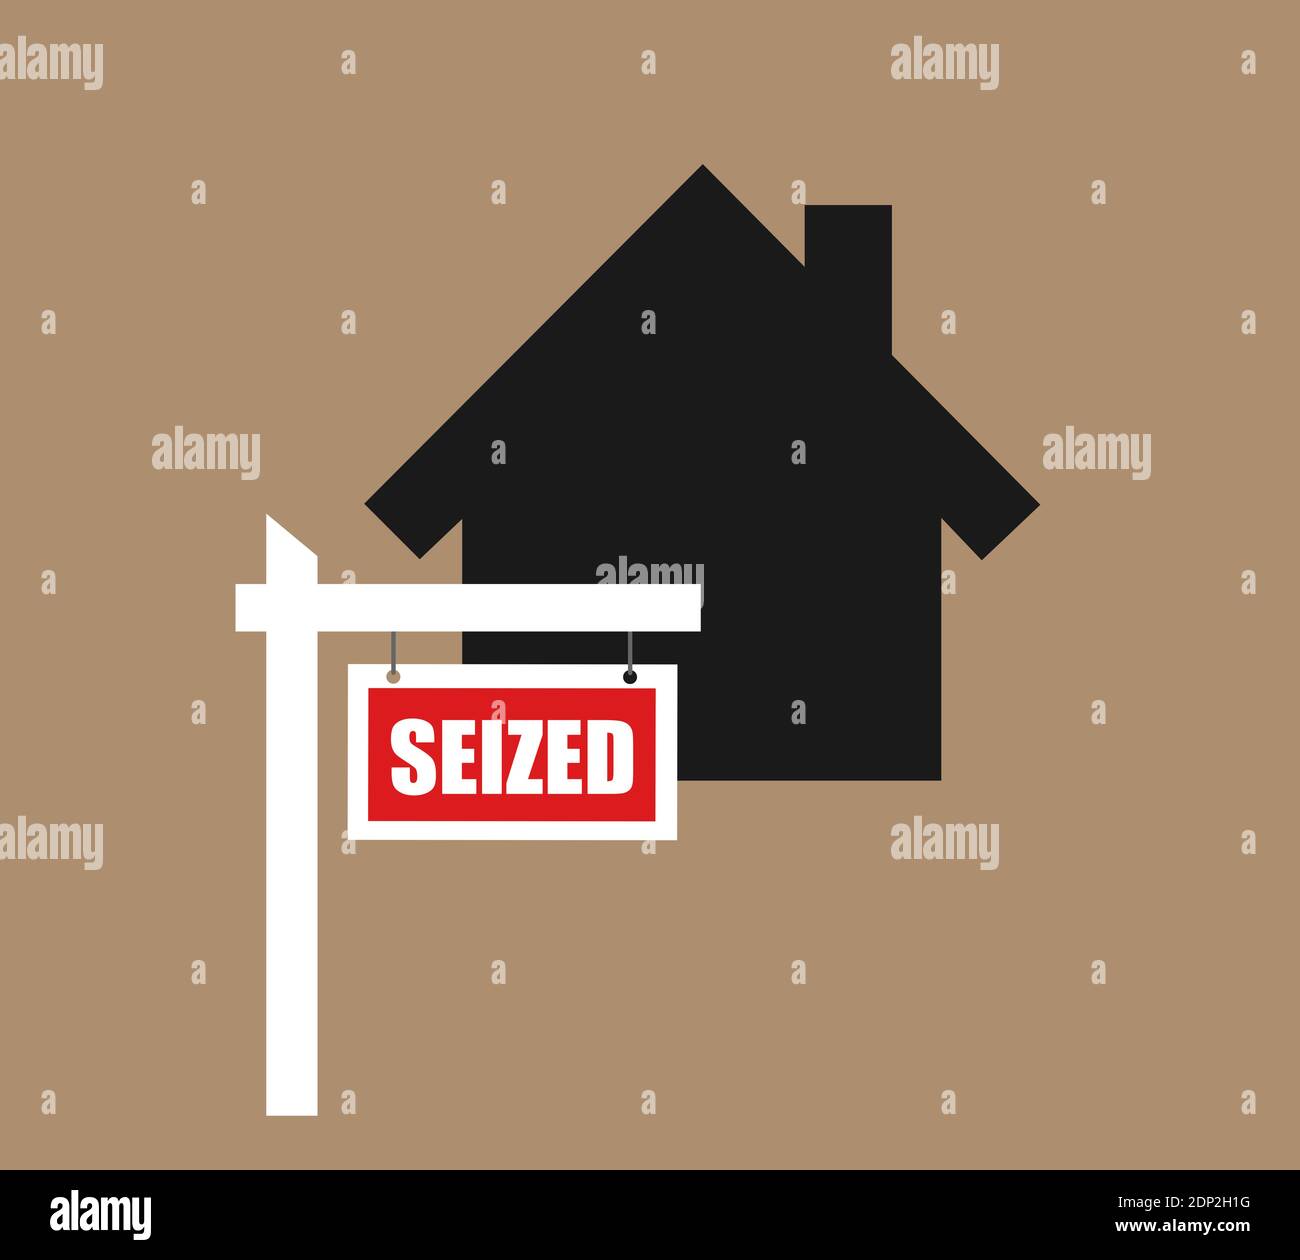 House is labelled as seized - insolvency leading to confiscation and seizure of real estate, property, house and residential building. Illustration. Stock Photo